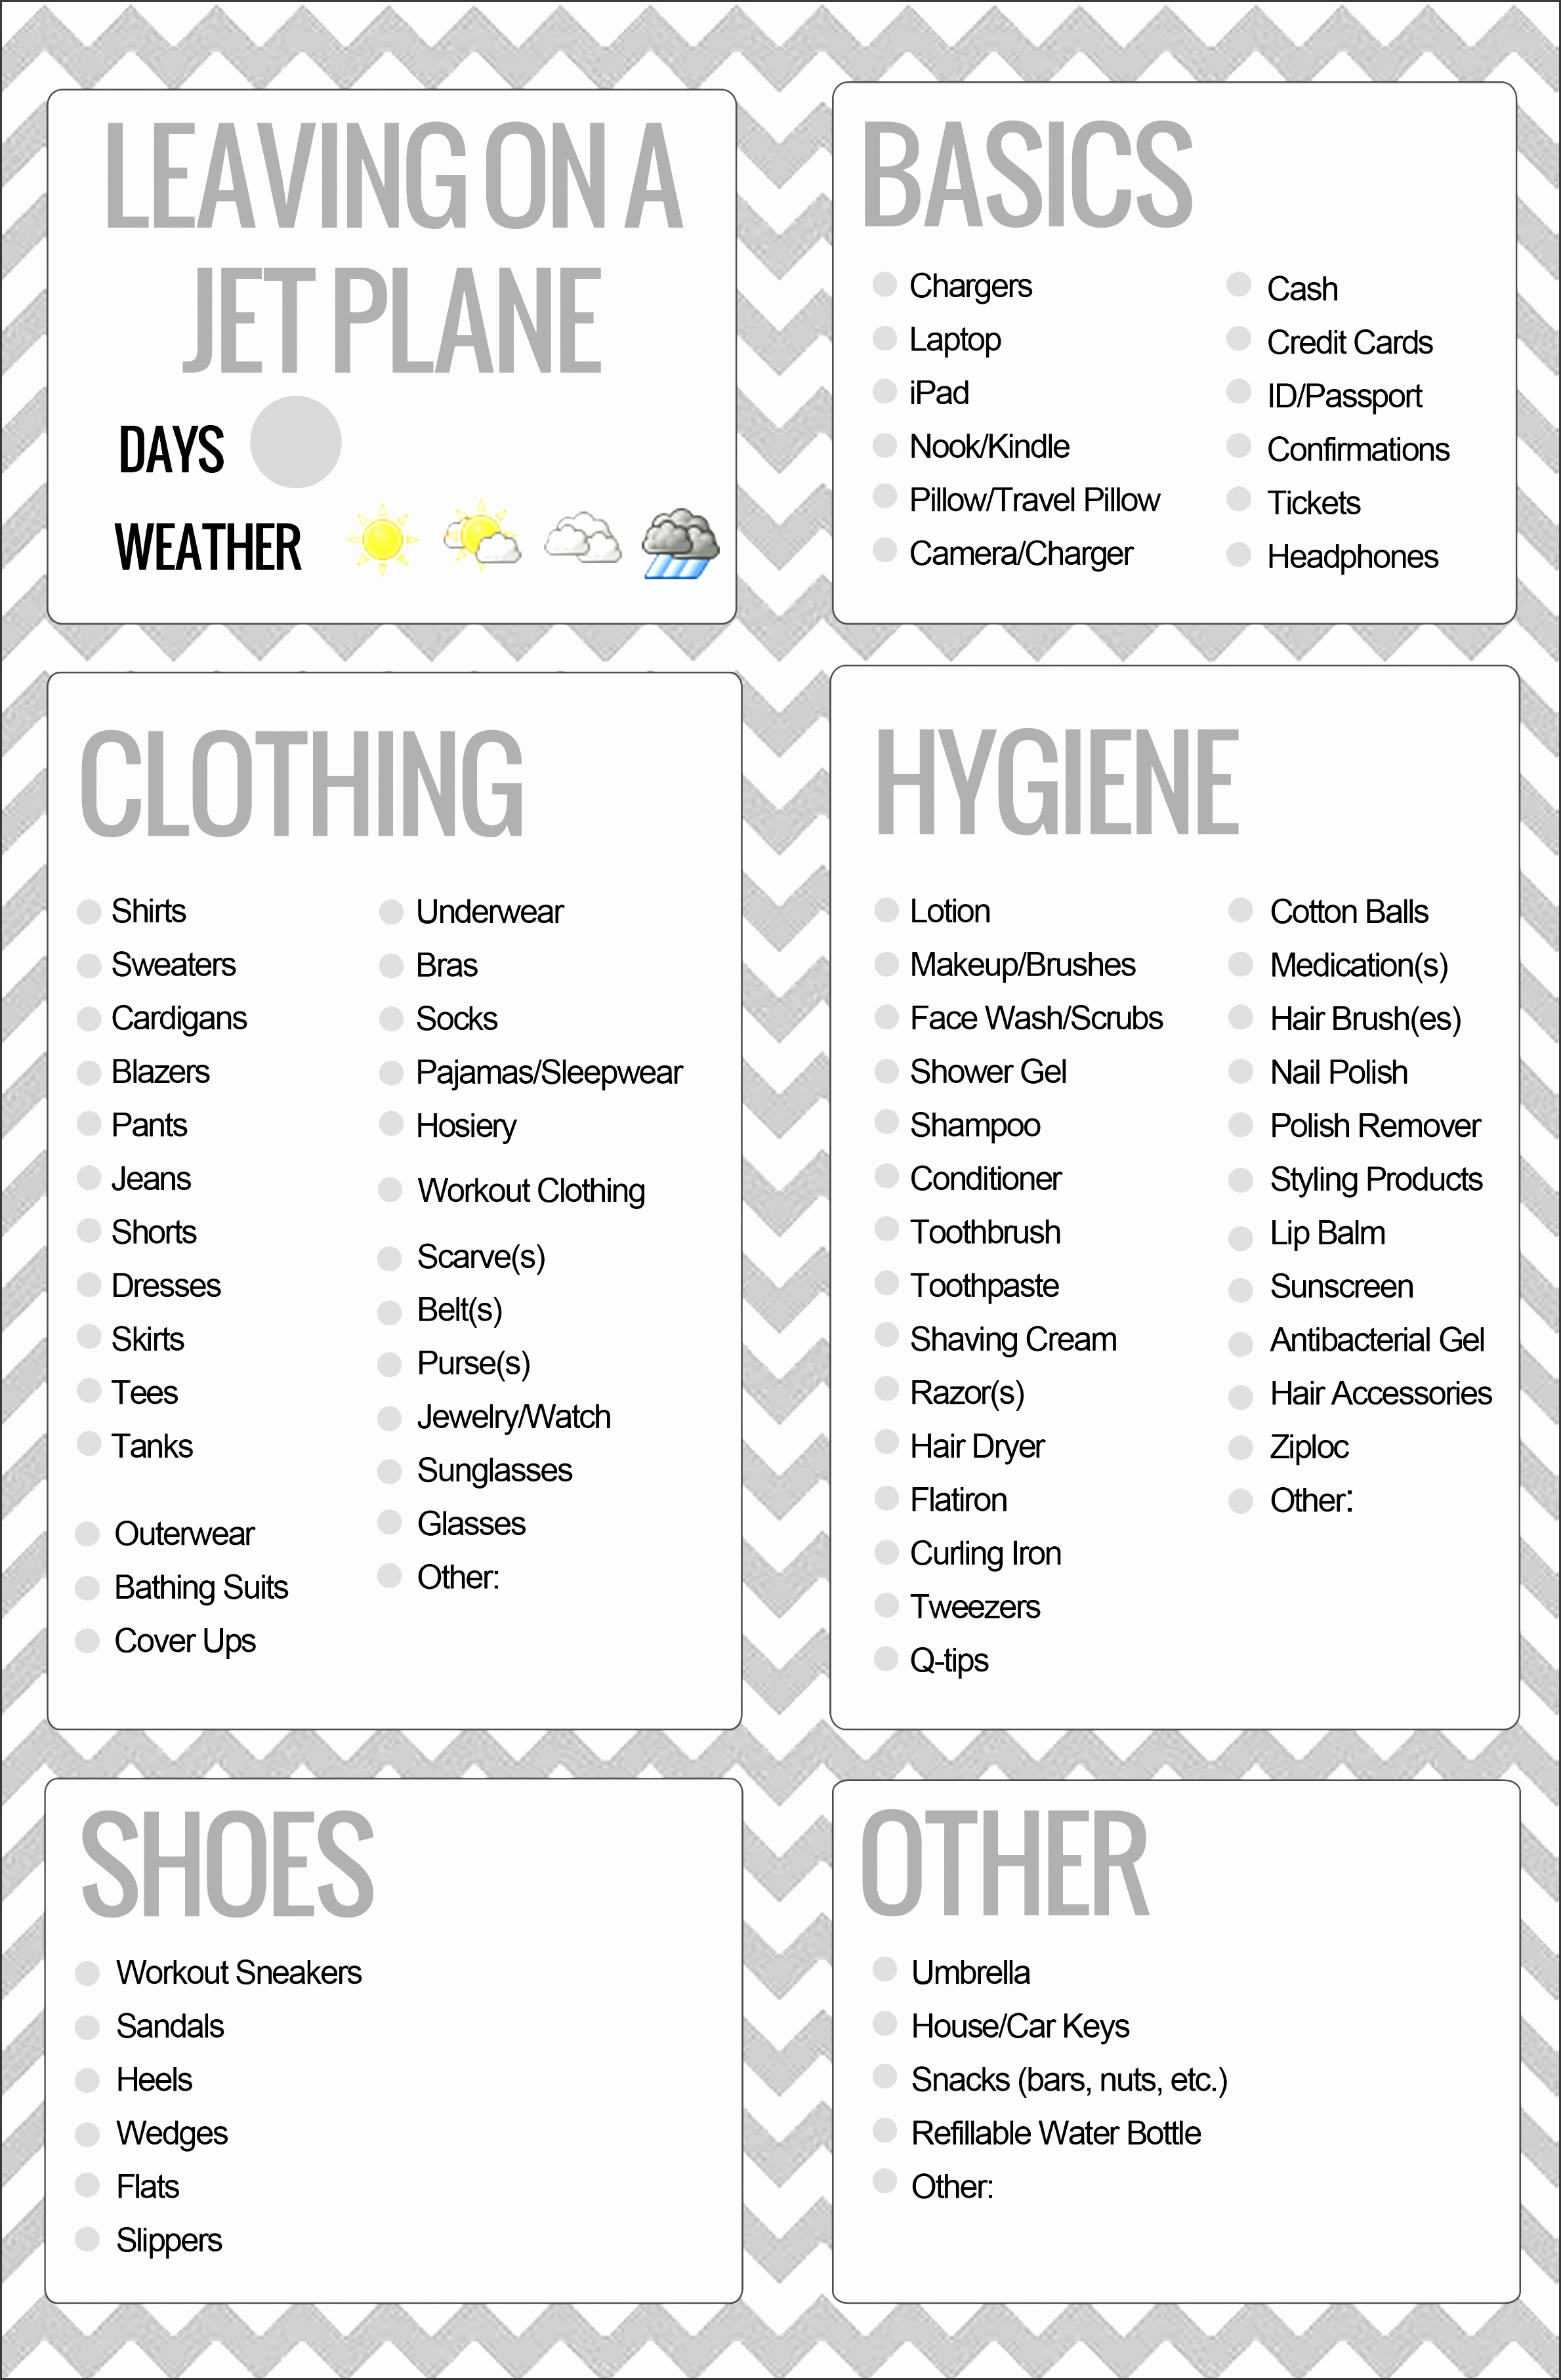 8 Family Vacation Packing List Template - SampleTemplatess